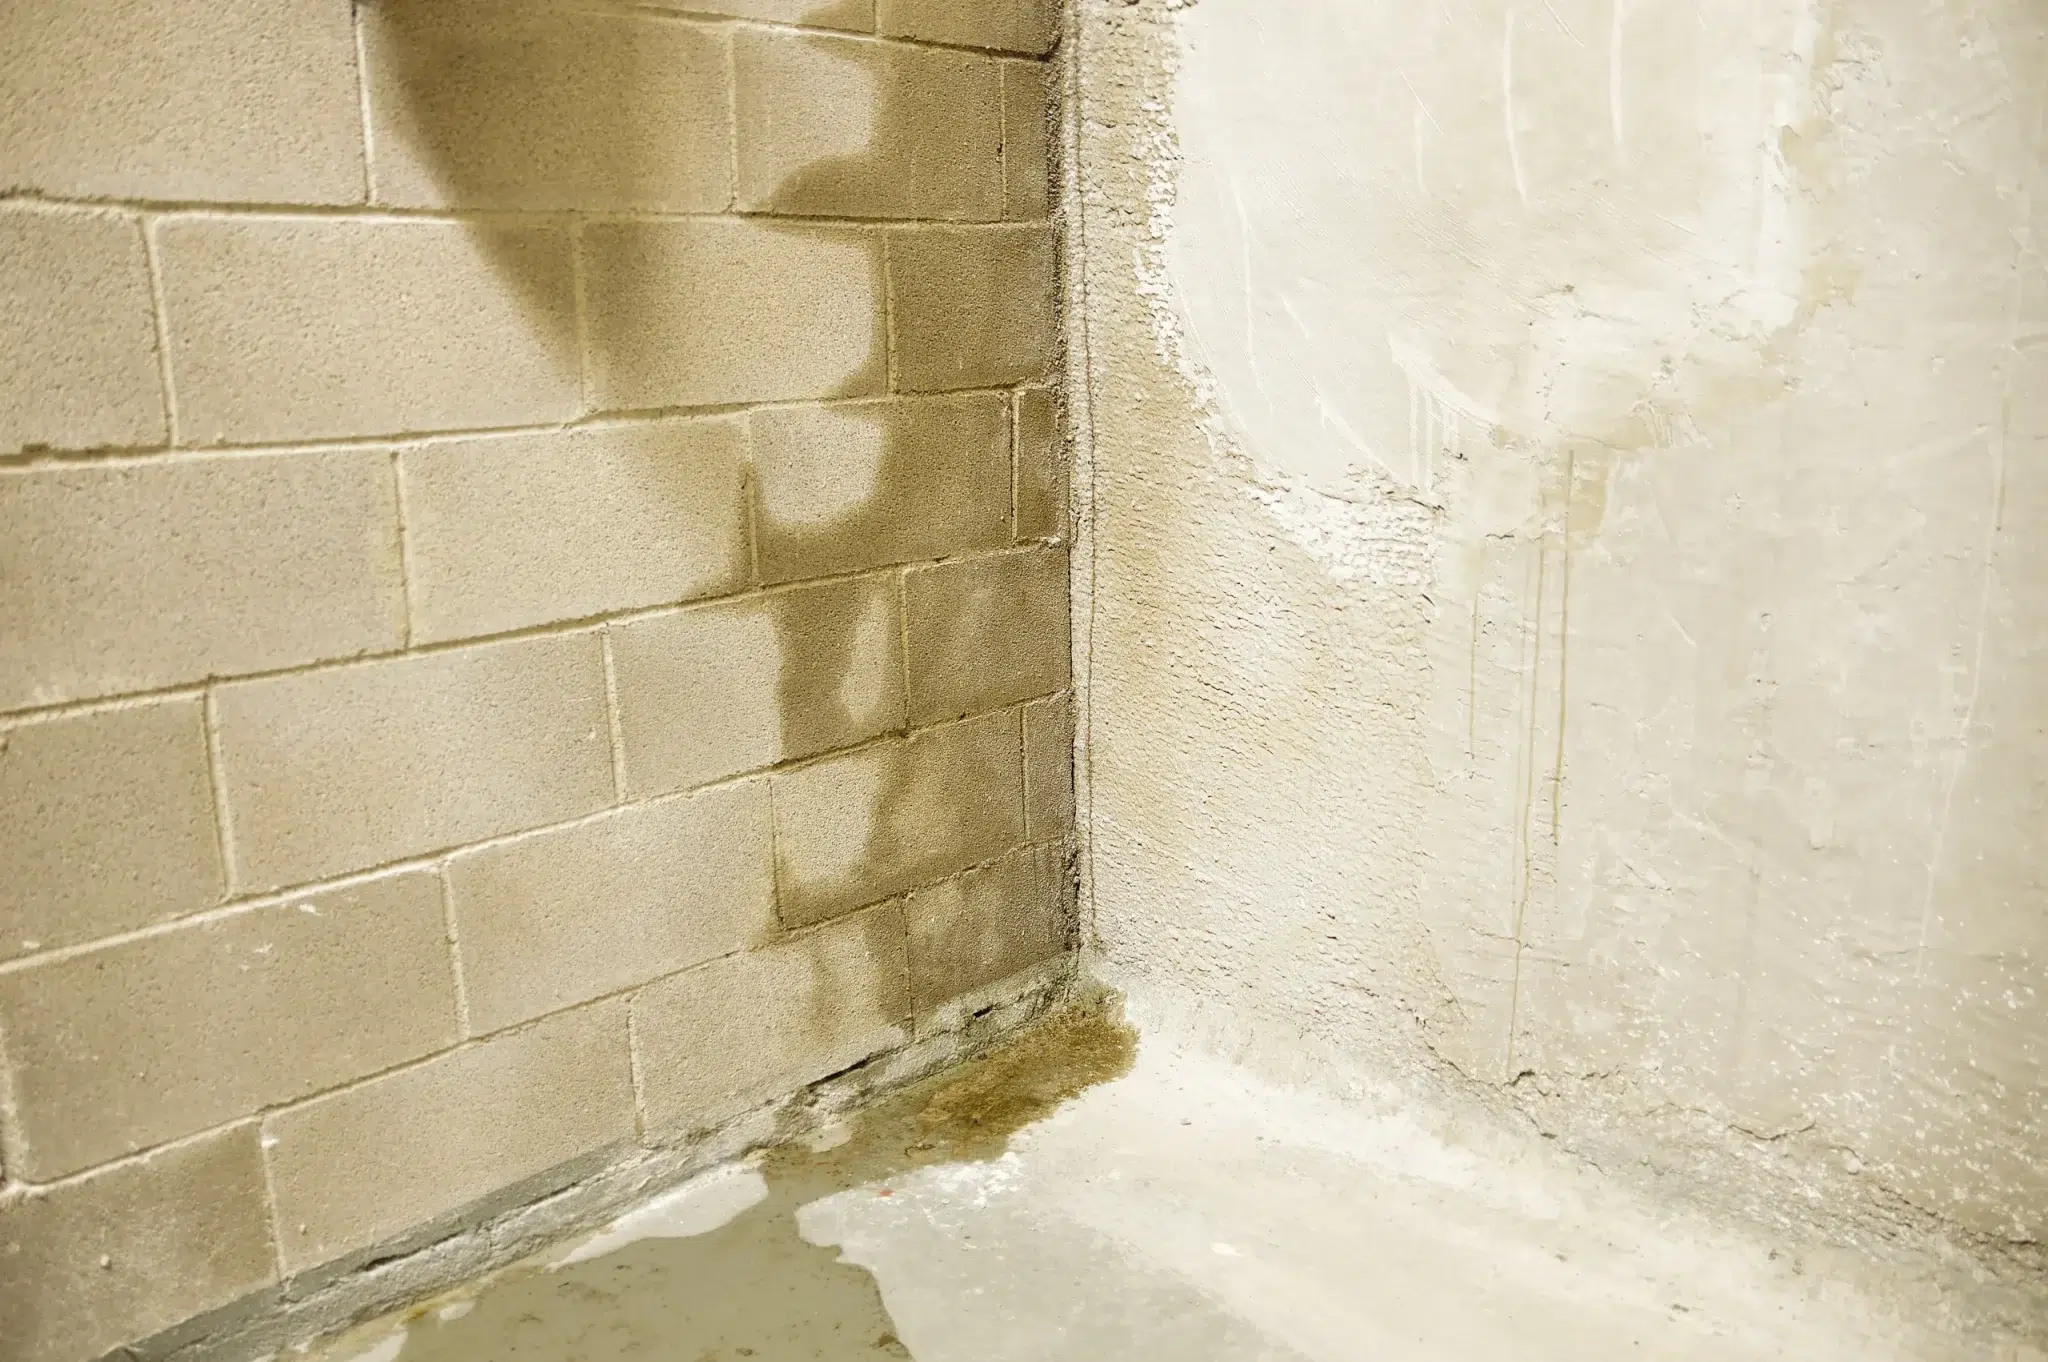 A corner of a basement with visible water seeping through the cinderblocks.